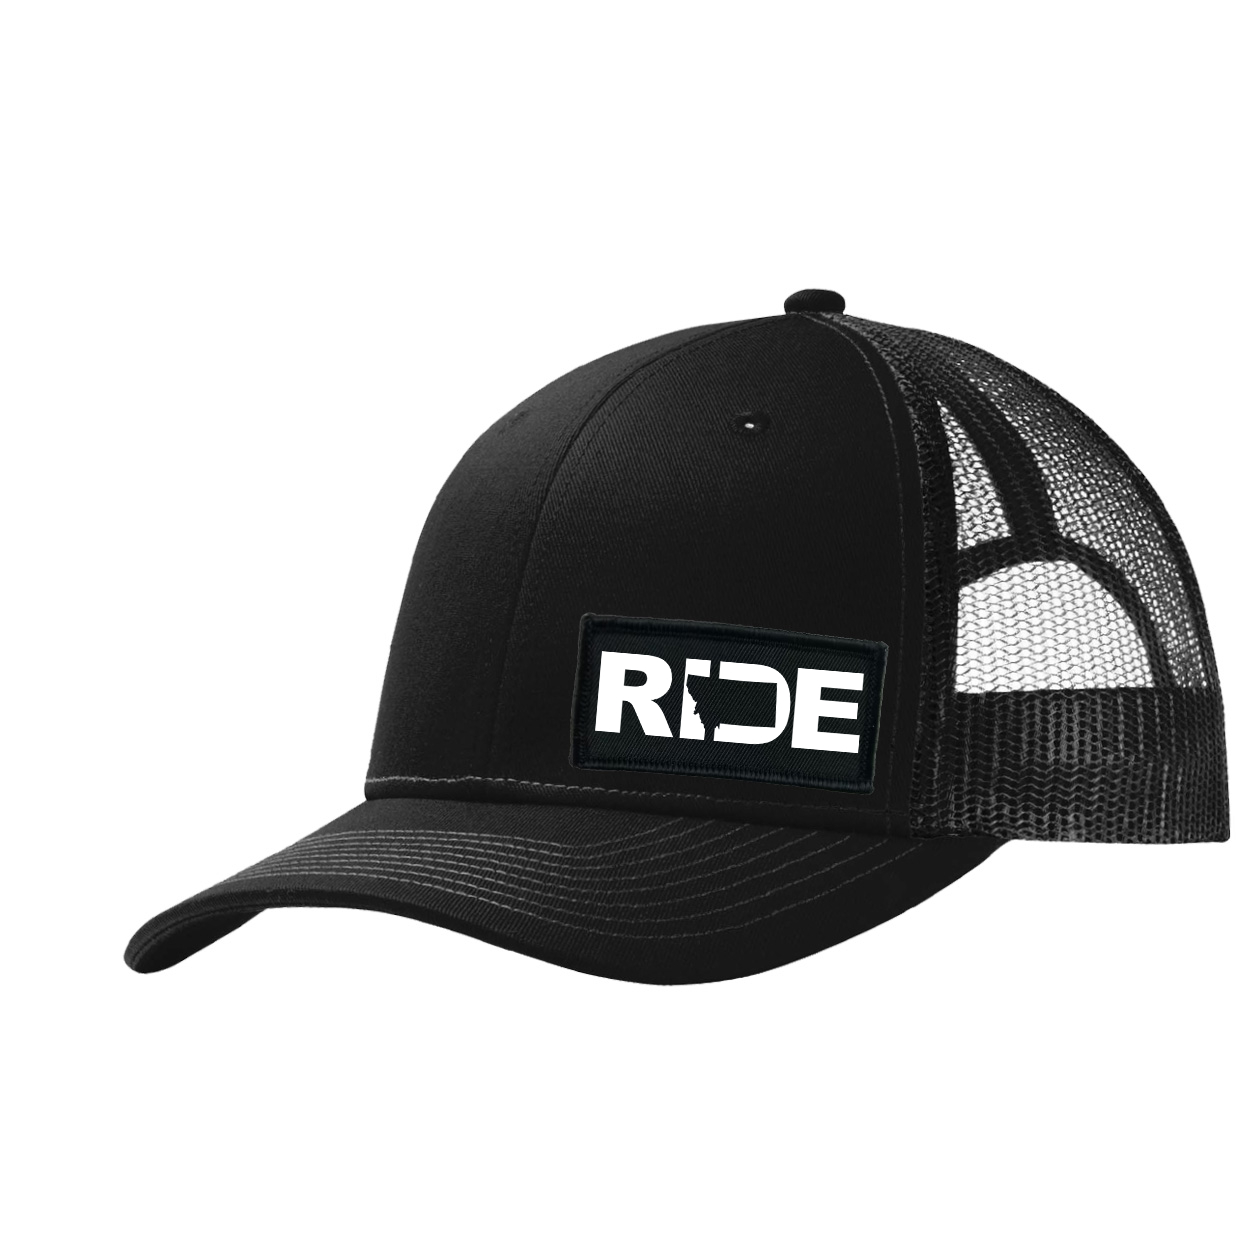 Ride Montana Night Out Woven Patch Snapback Trucker Hat Black (White Logo)